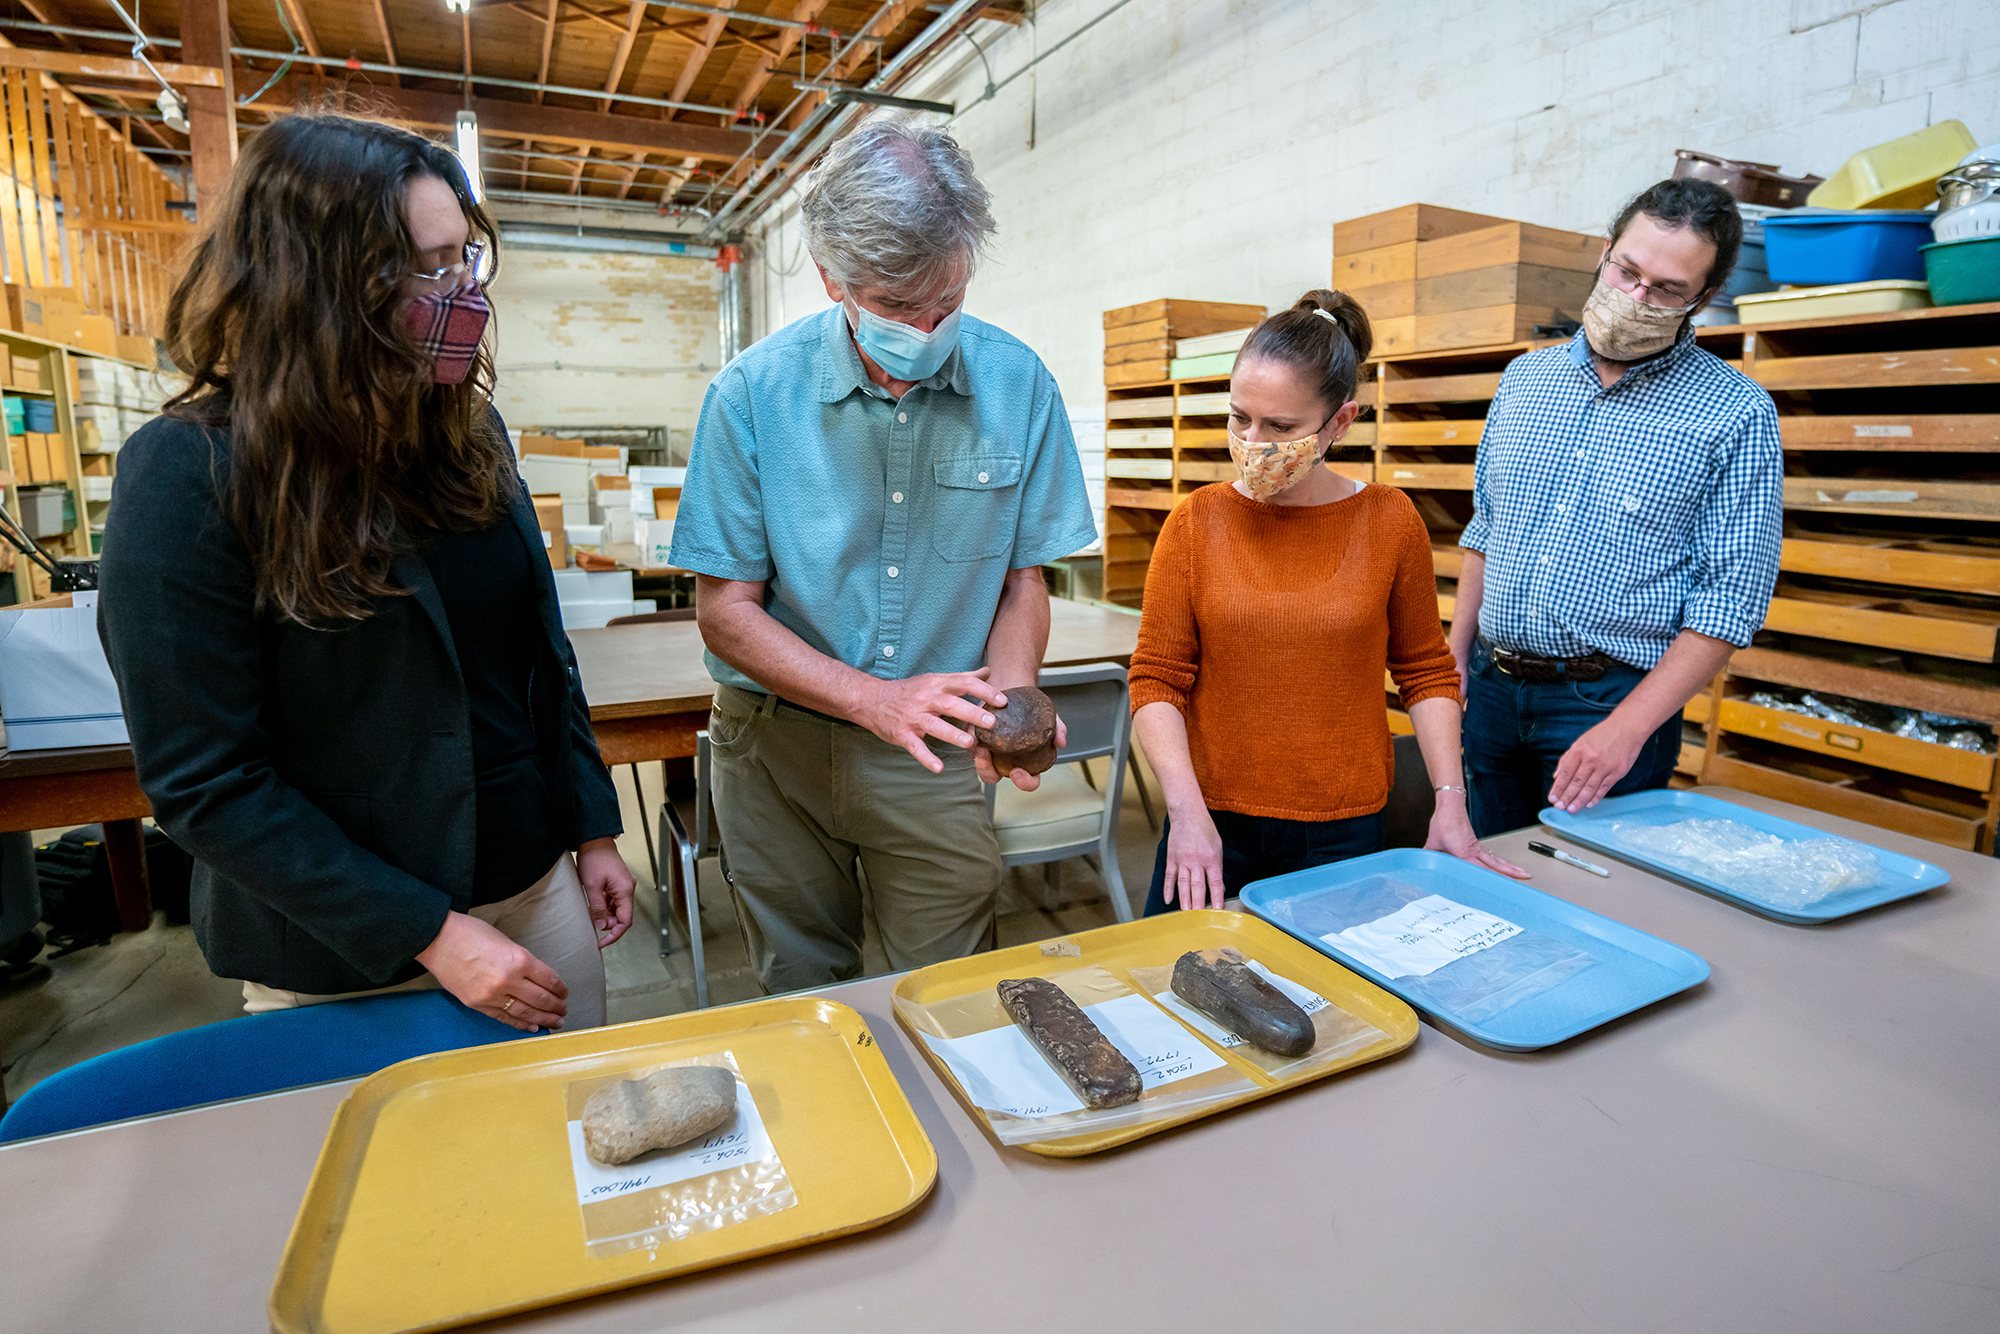 (From left) Postdoctoral scholar Katharine Napora, Webb Museum Director George Crothers, Museum Curator Lisa Guerre and graduate student Alex Metz discuss the grooved maul Crothers is holding. Photo courtesy: UK Research.